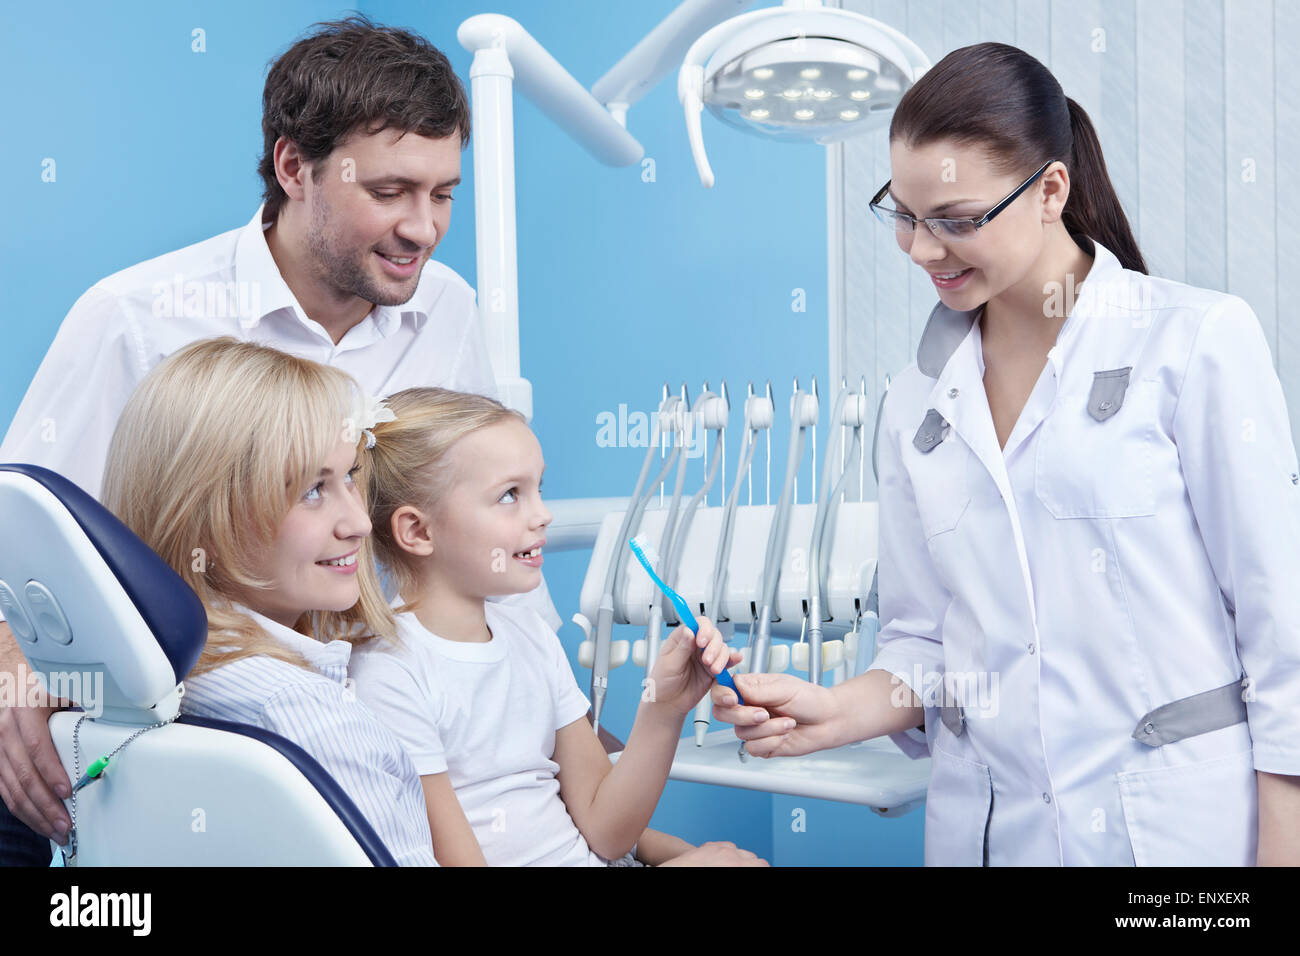 Dentist gives the child a toothbrush in the dental office Stock Photo